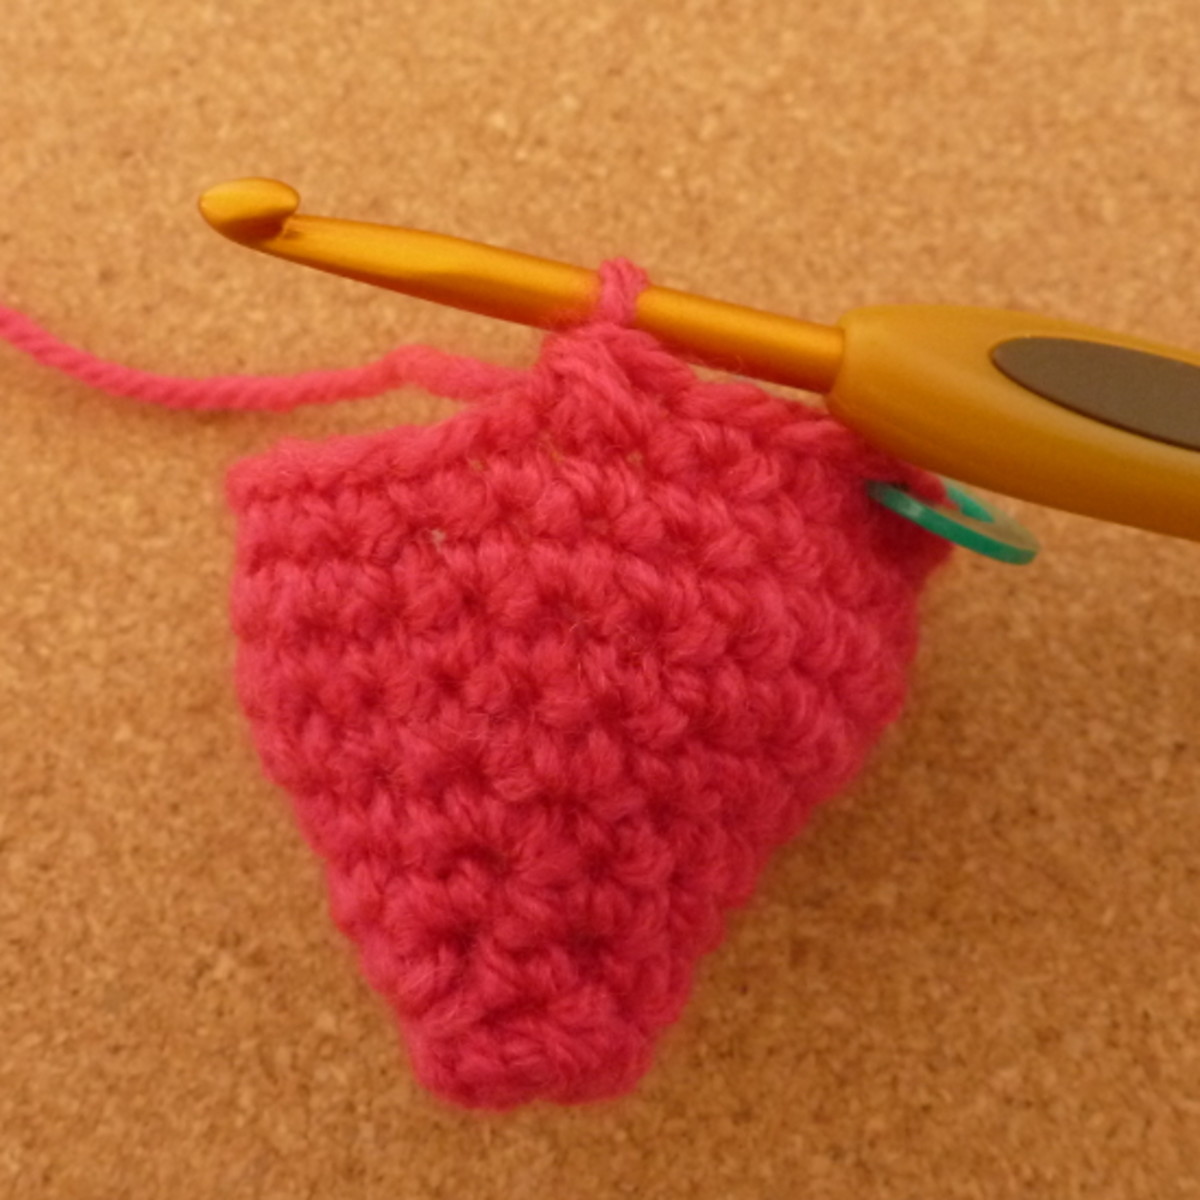 Crocheting round to make a 3D design.